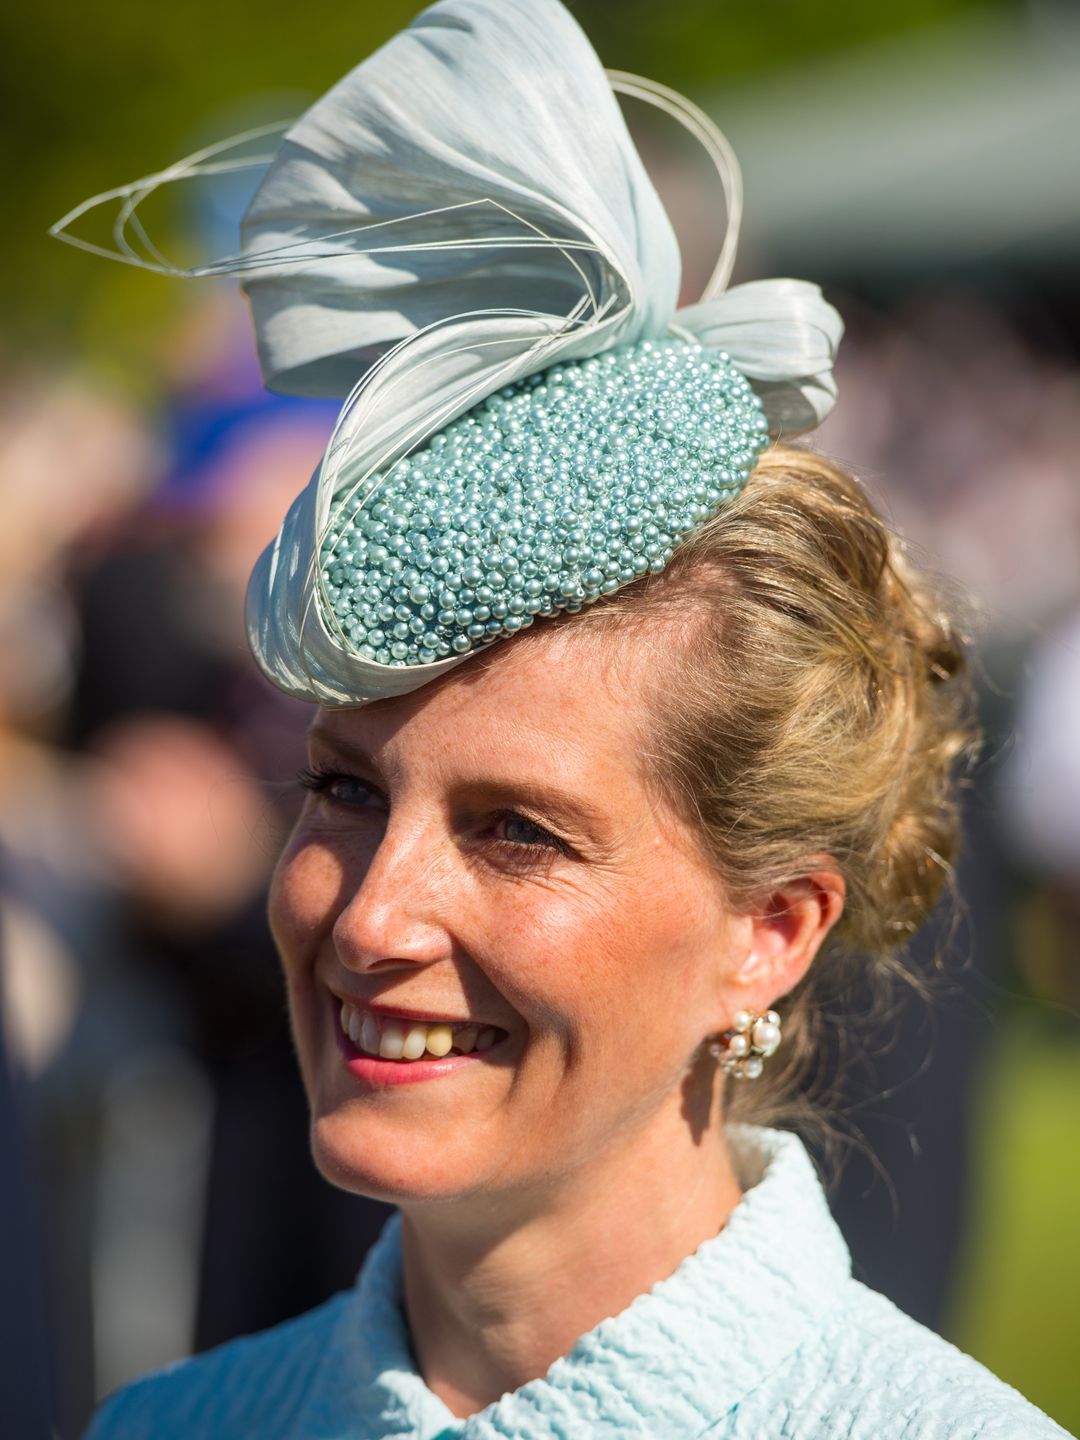 woman wearing turquoise hat with pearls 